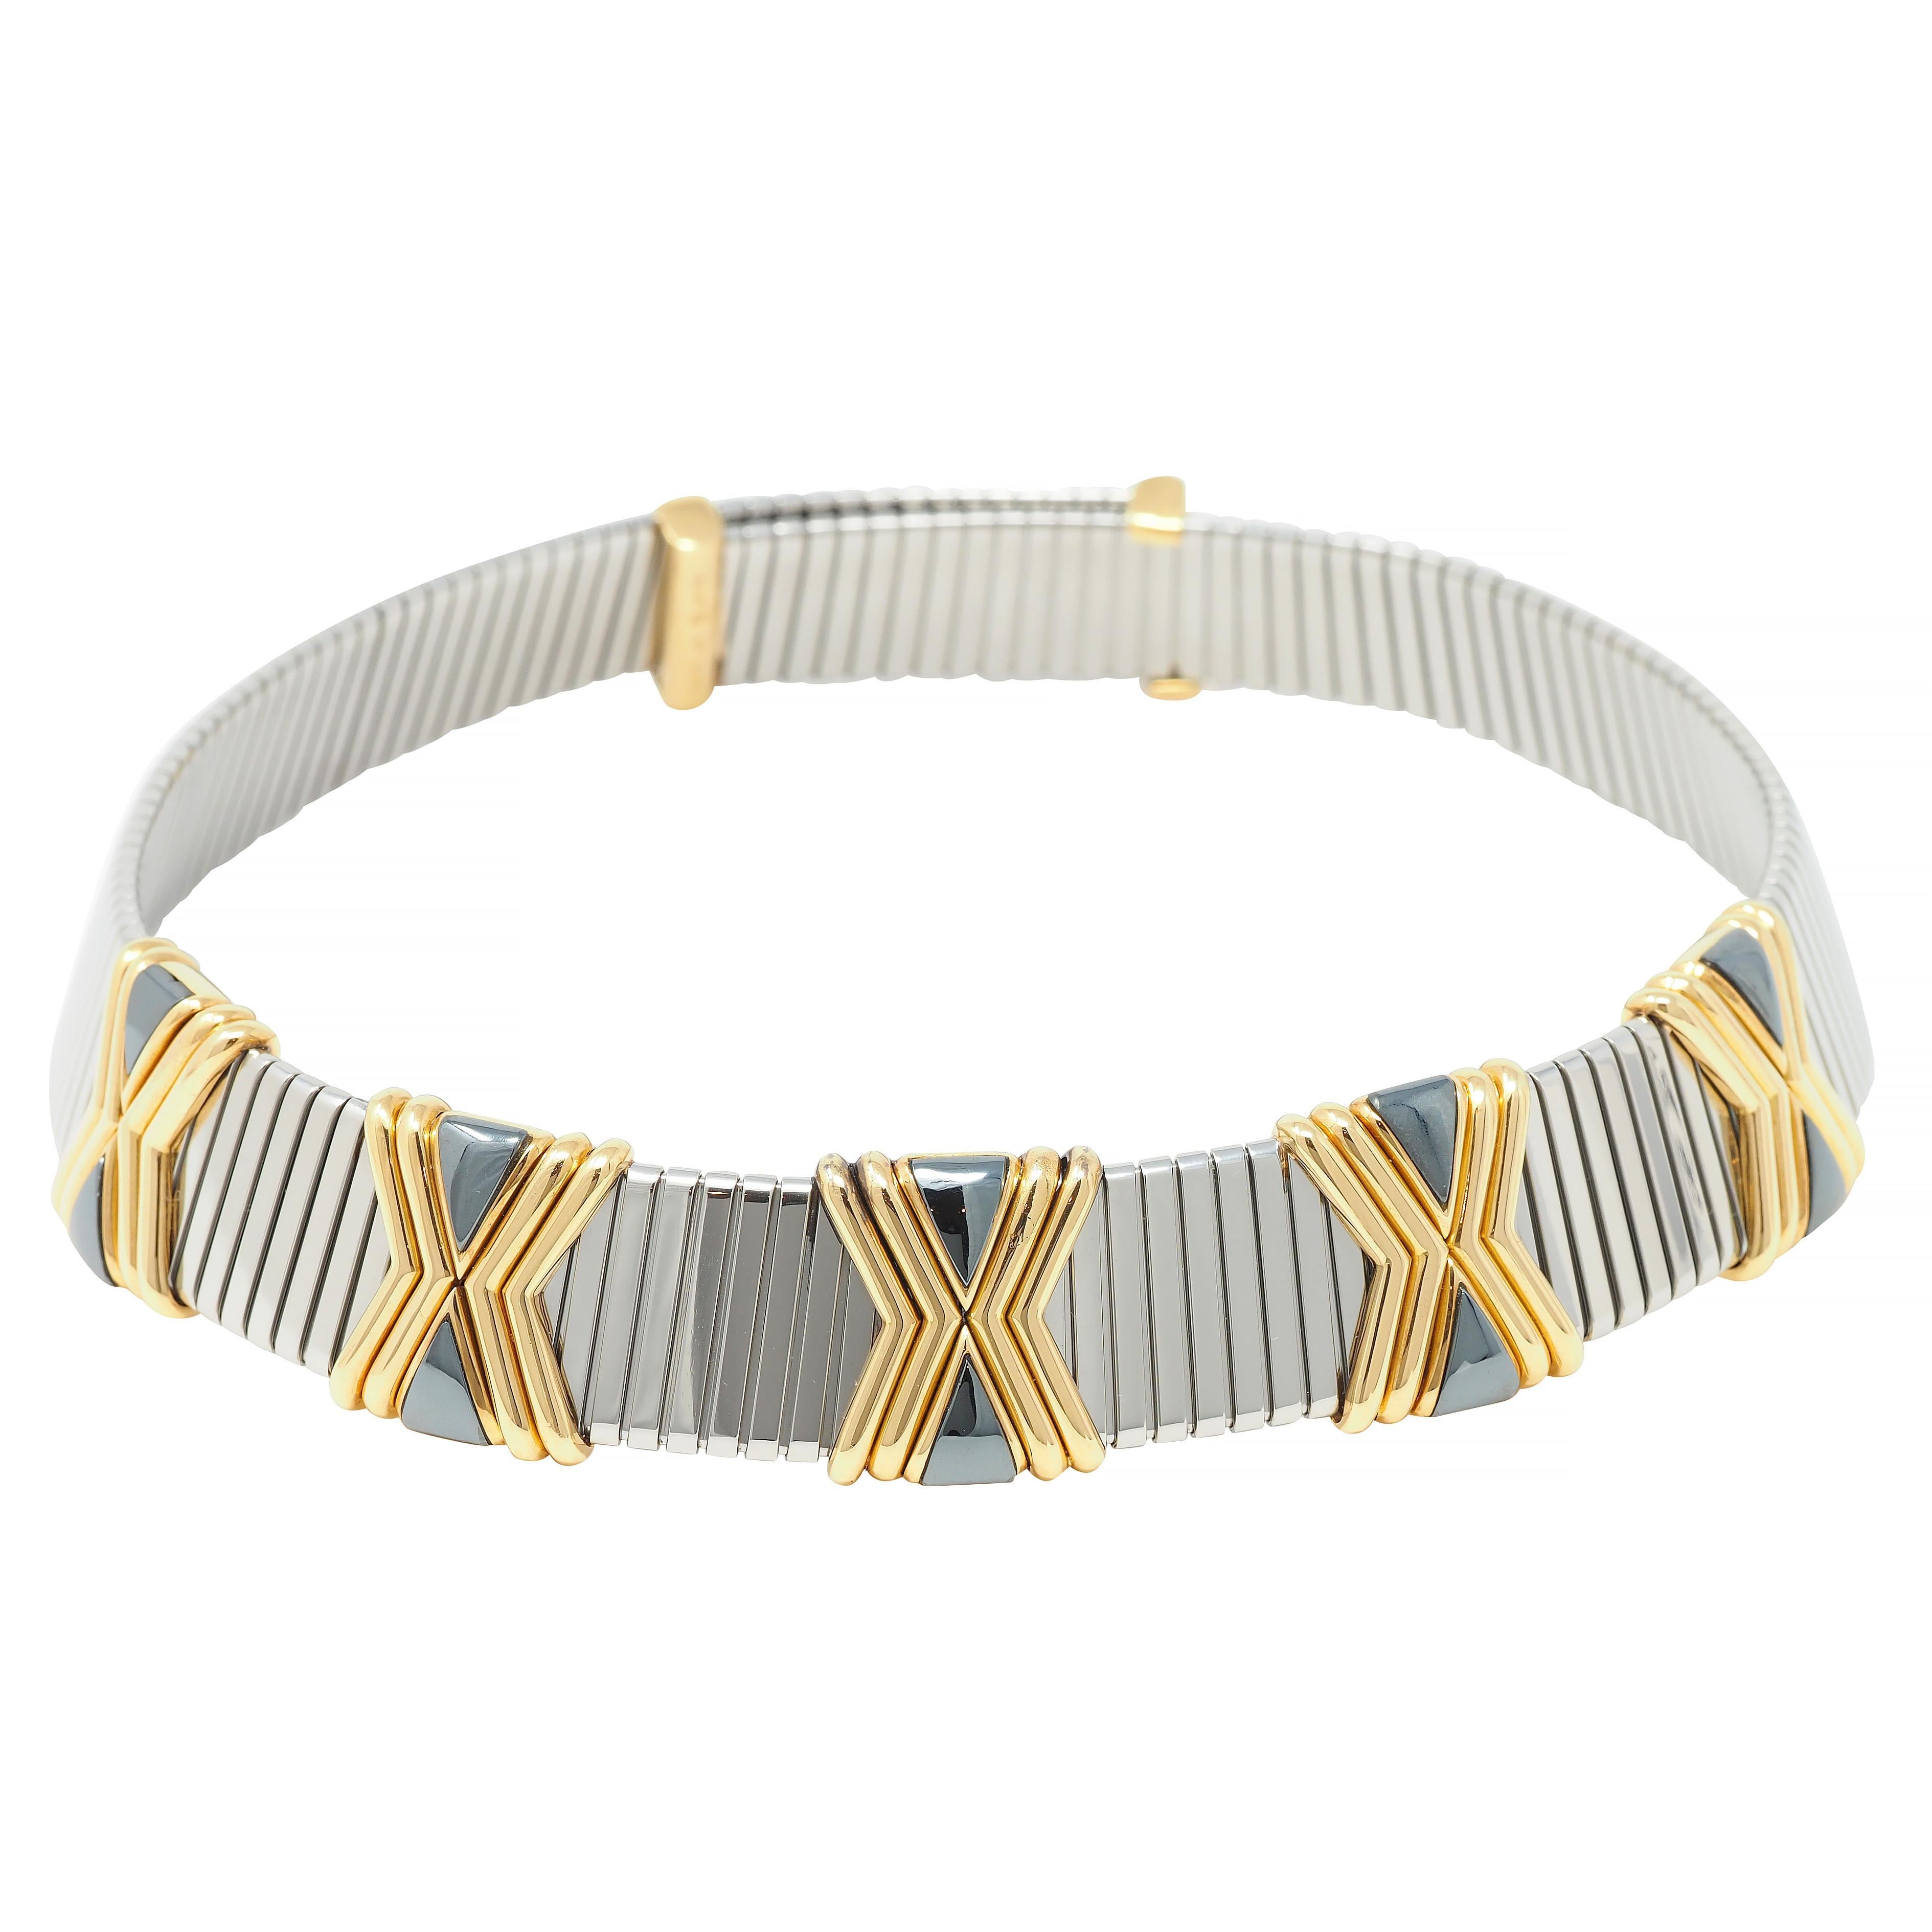 Comprised of grooved stainless steel segments with raised yellow gold 'X' motif stations 
Accented by triangular-shaped hematite inlay - dark metallic gray with gold surrounds
Tubogas style with considerable flexibility and movement 
Completed by